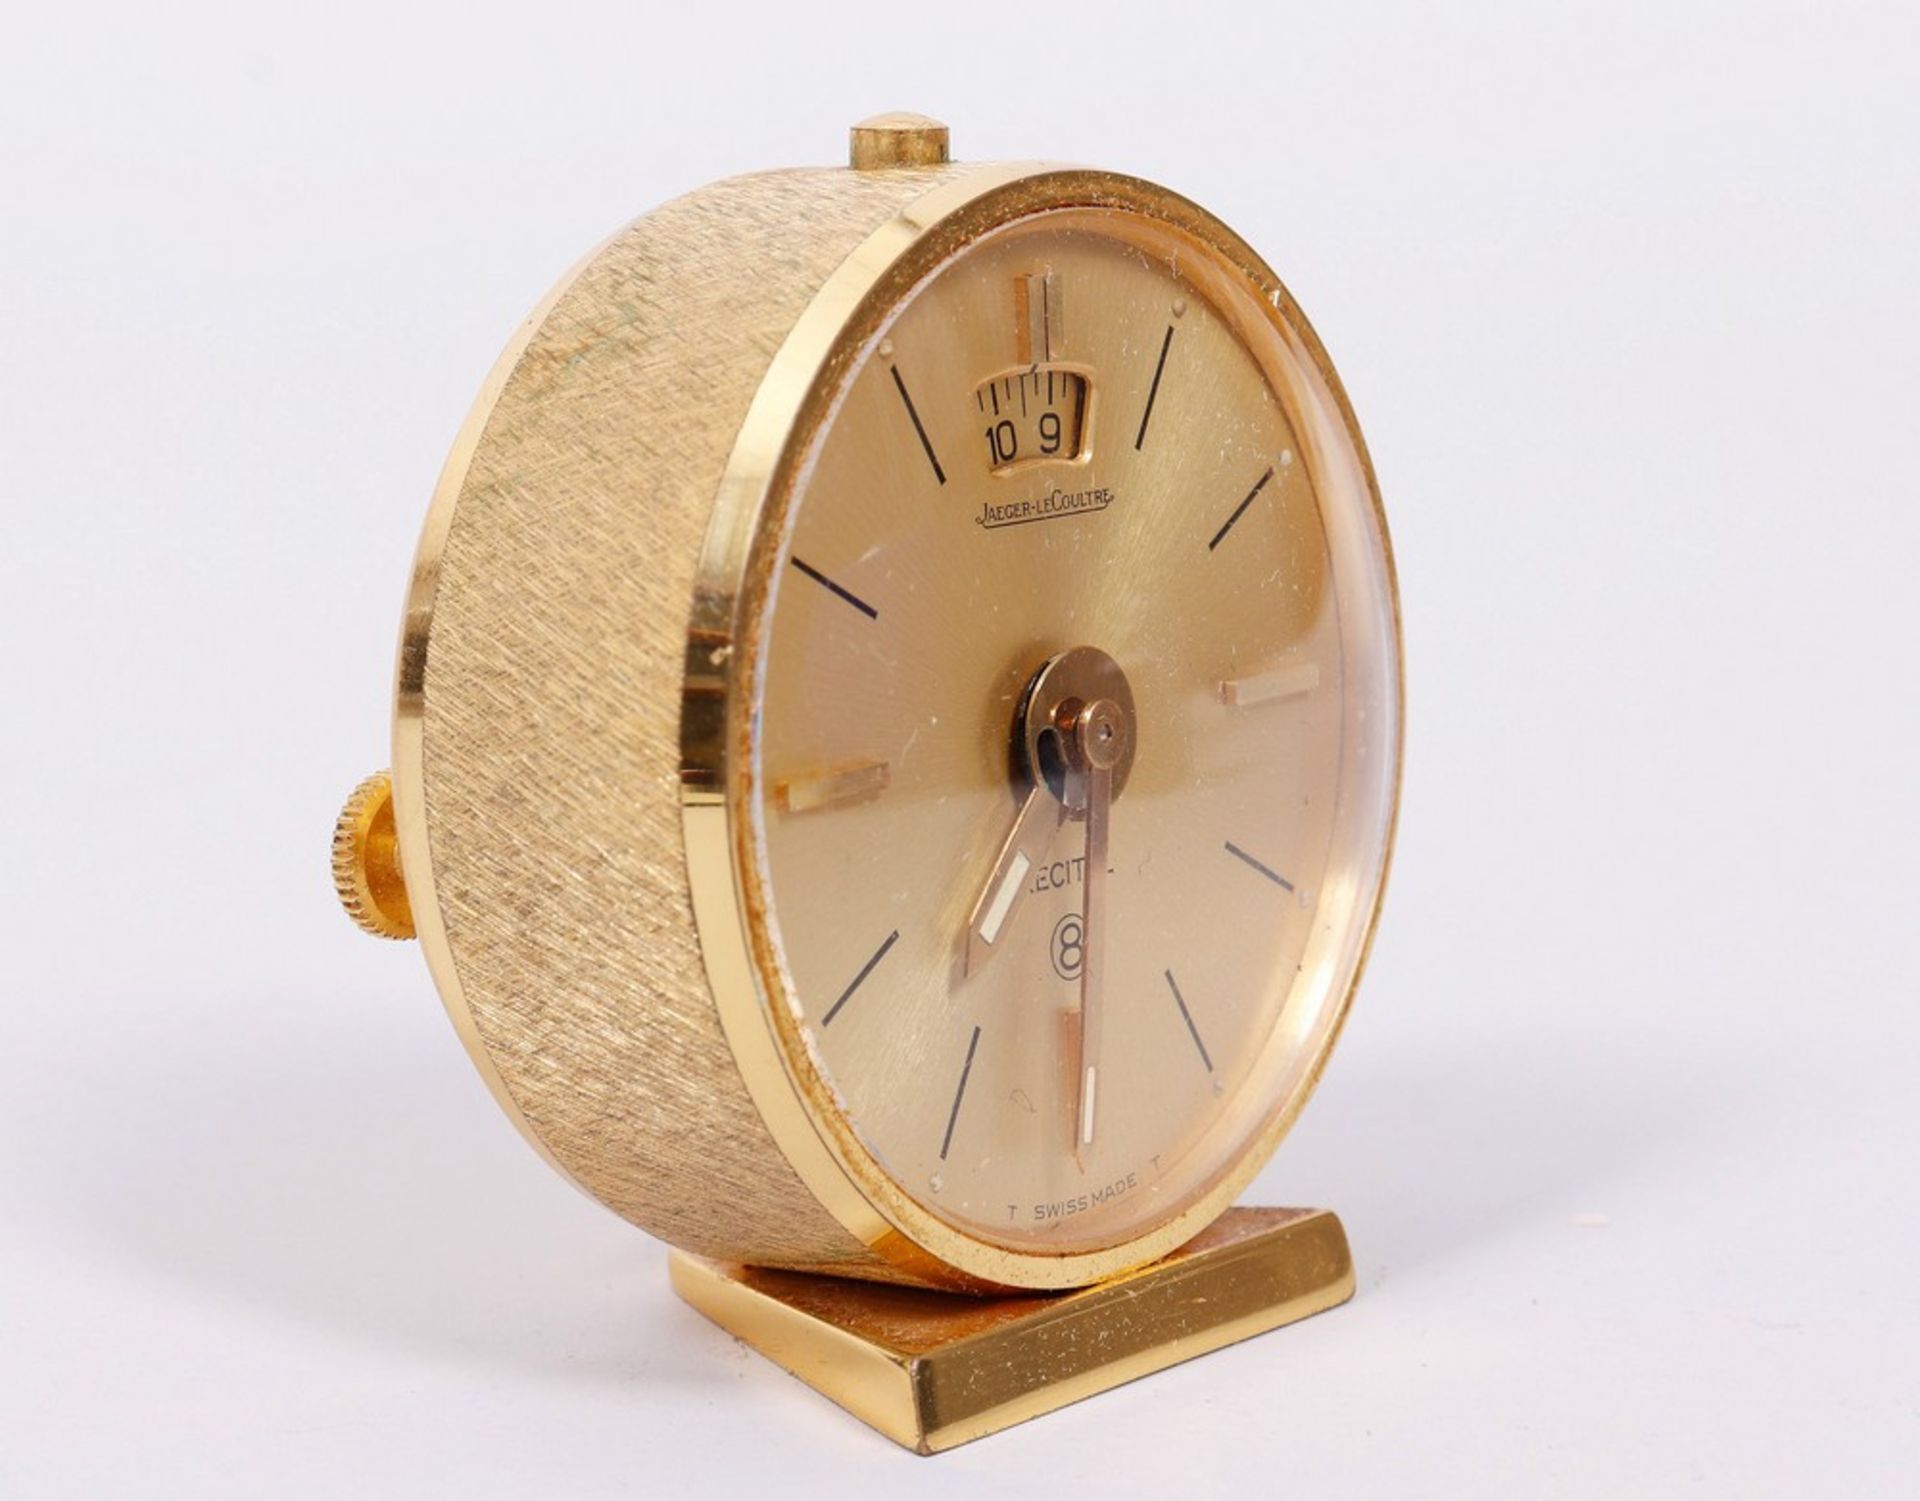 Travel alarm clock/table clock in the original case, Jaeger Le Coultre, mid-20th C. - Image 3 of 7